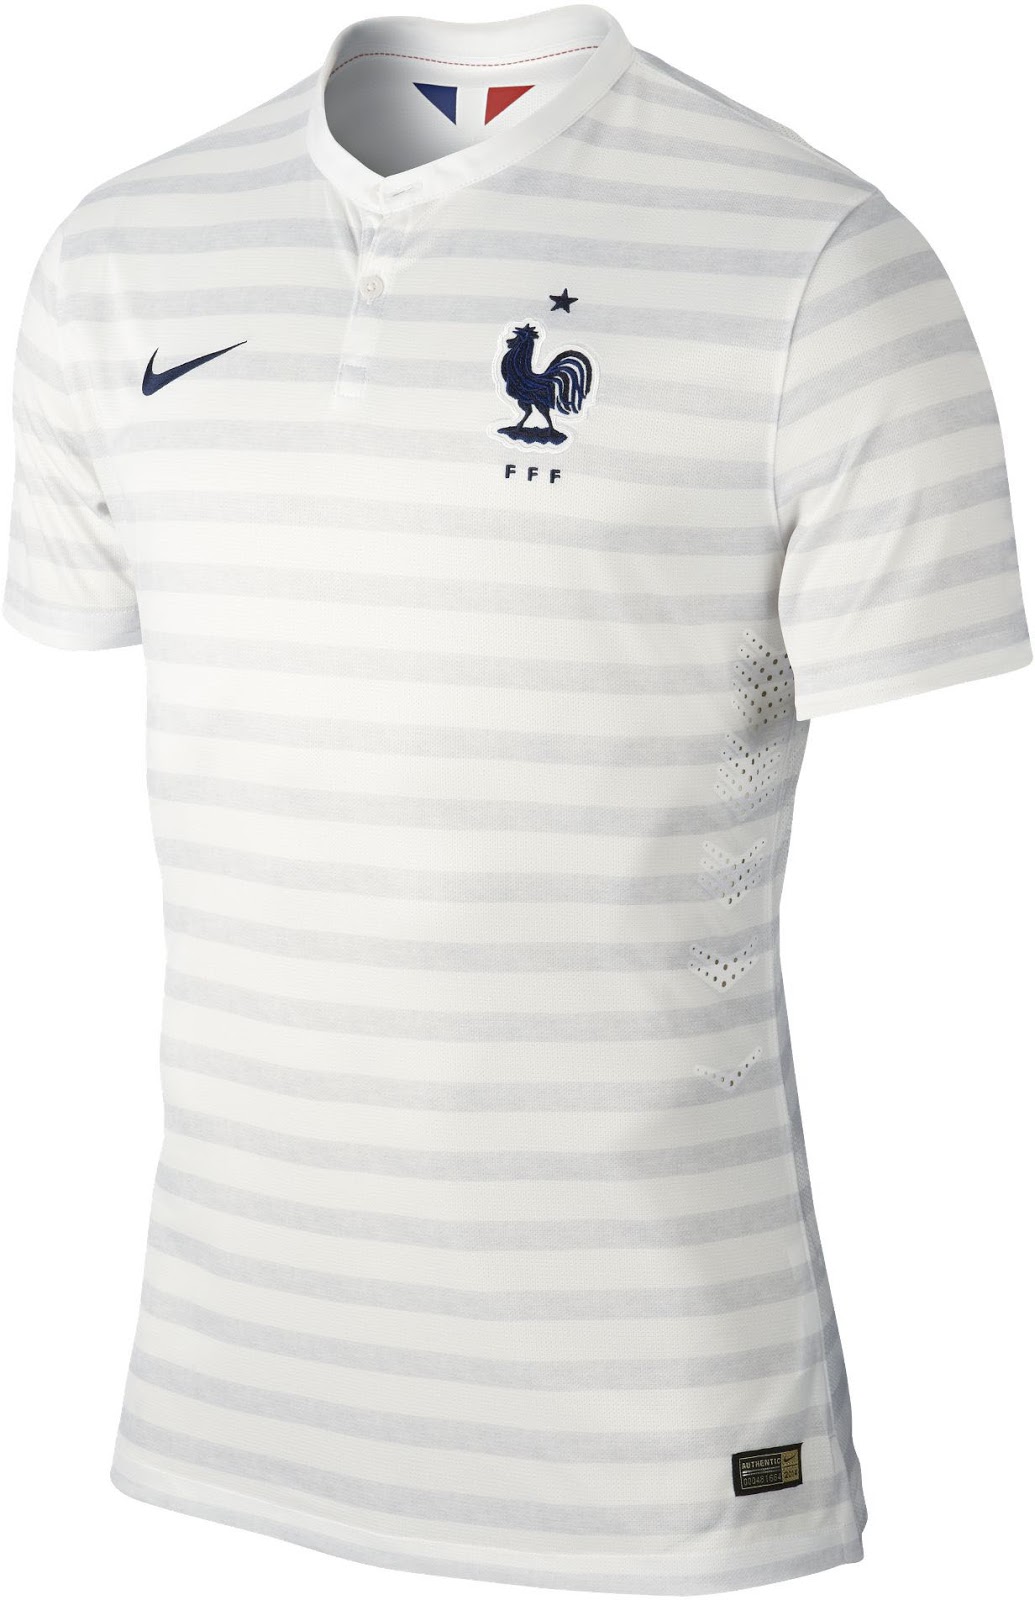 France 2014 World Cup Away kit (1)